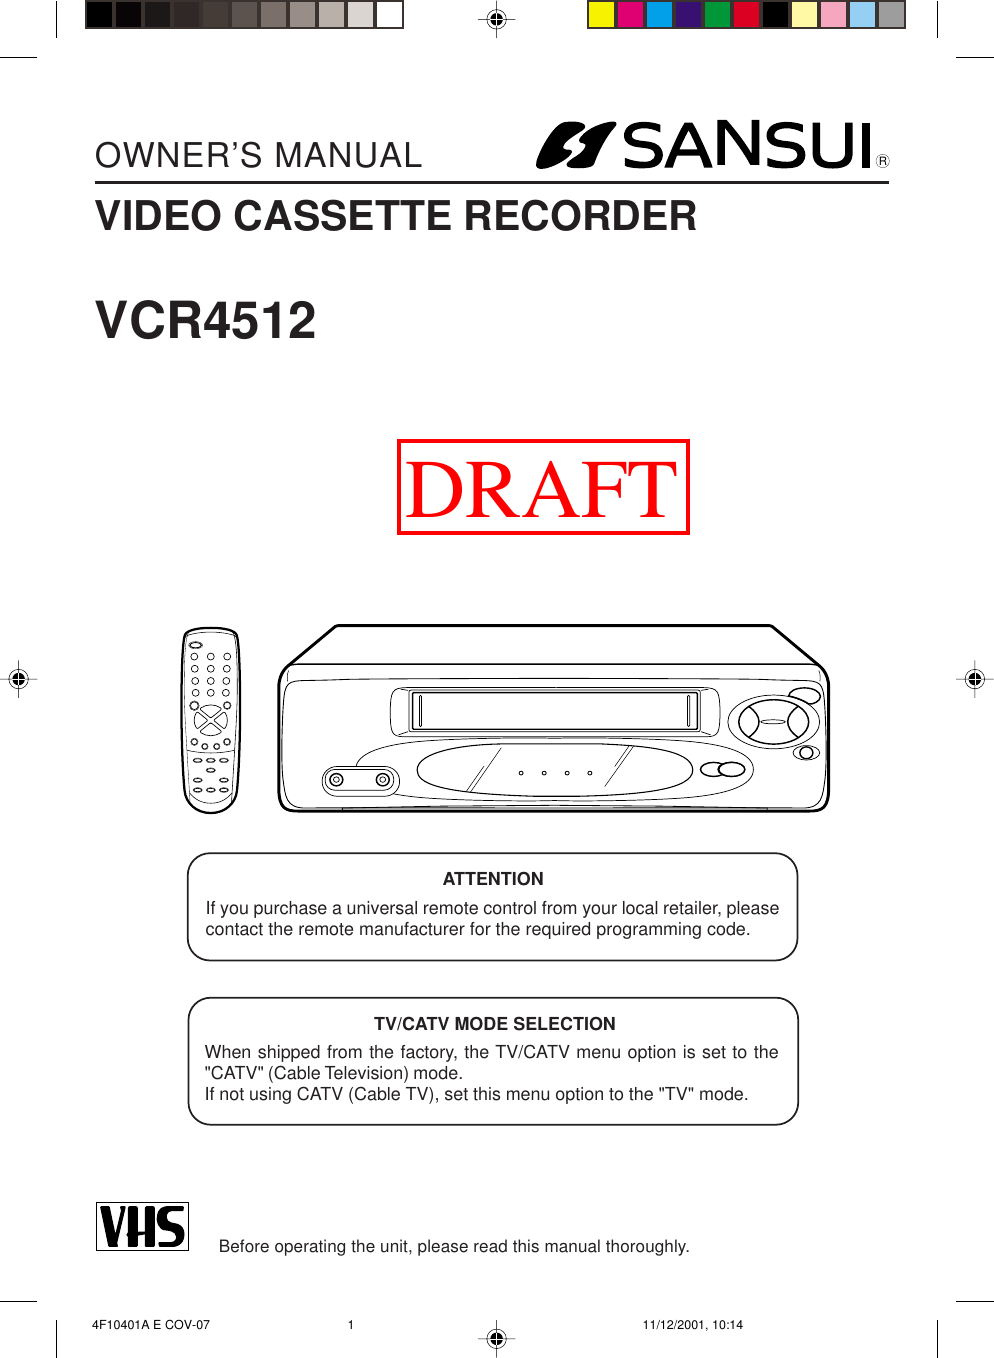 ENGLISH  4F10401A E COV-07 11/12/2001, 10:141OWNER’S MANUALBefore operating the unit, please read this manual thoroughly.VCR4512TV/CATV MODE SELECTIONWhen shipped from the factory, the TV/CATV menu option is set to the&quot;CATV&quot; (Cable Television) mode.If not using CATV (Cable TV), set this menu option to the &quot;TV&quot; mode.ATTENTIONIf you purchase a universal remote control from your local retailer, pleasecontact the remote manufacturer for the required programming code.RVIDEO CASSETTE RECORDERDRAFT